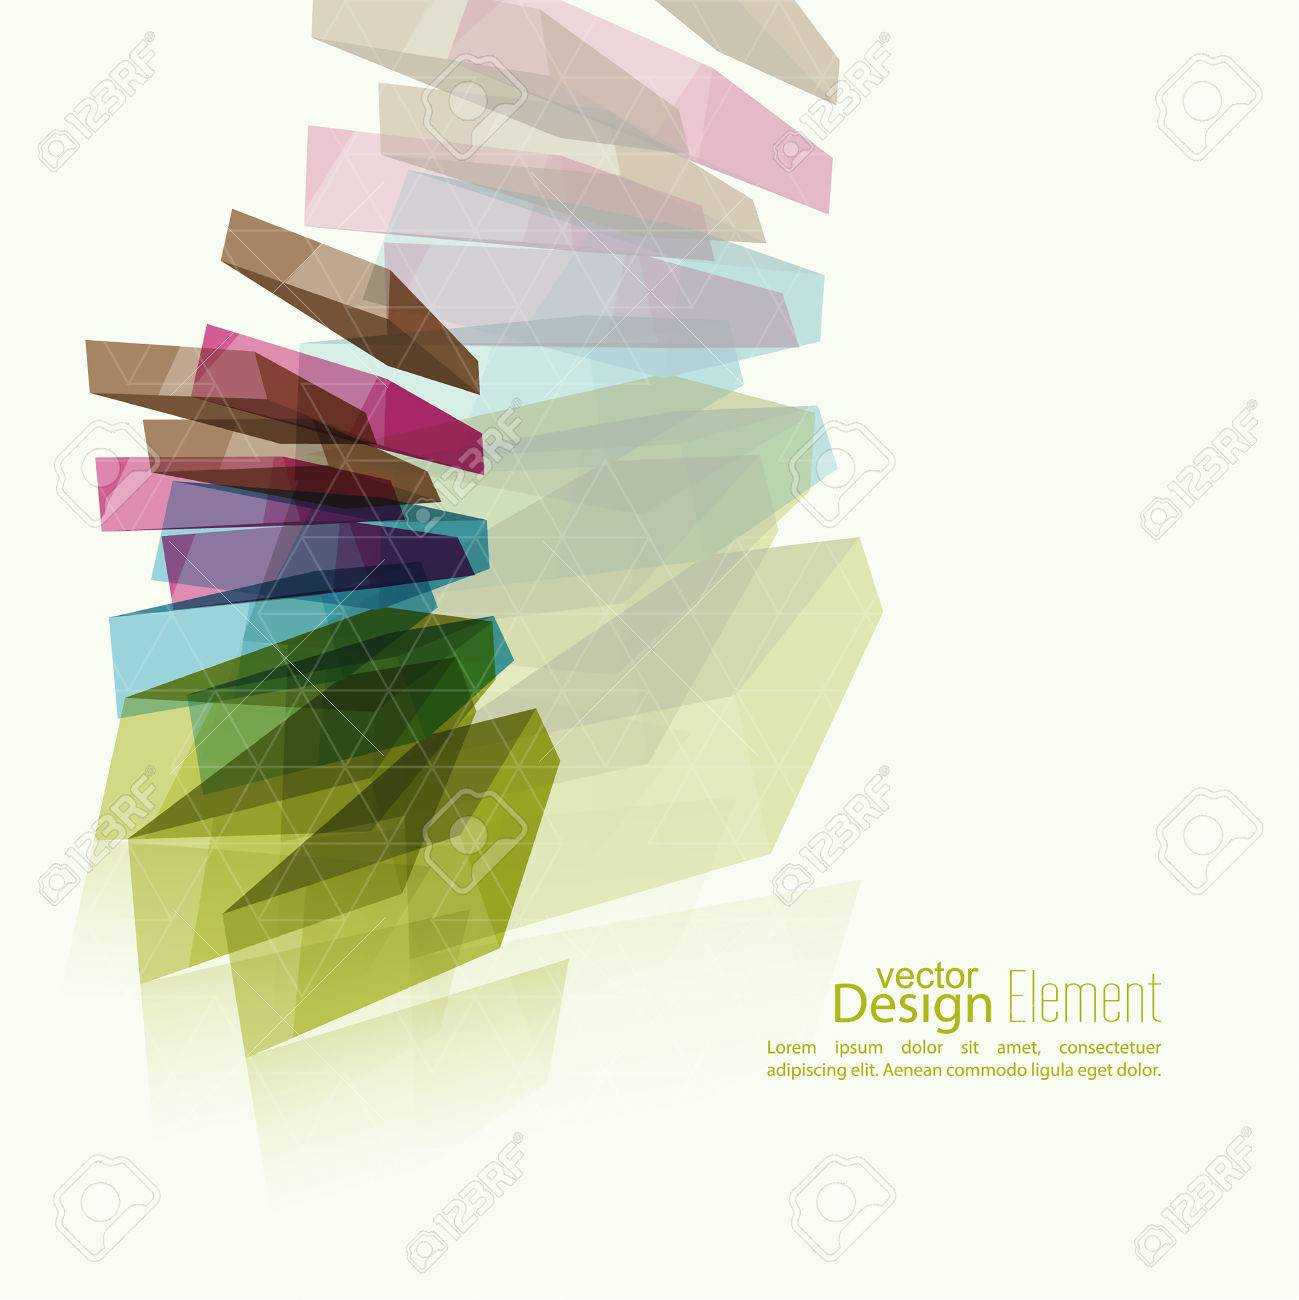 Abstract Background With Colored Crystals, Trellis Structure. For Cover  Book, Brochure, Flyer, Poster, Magazine, Booklet, Leaflet, Cd Cover Design, With Mobile Book Report Template